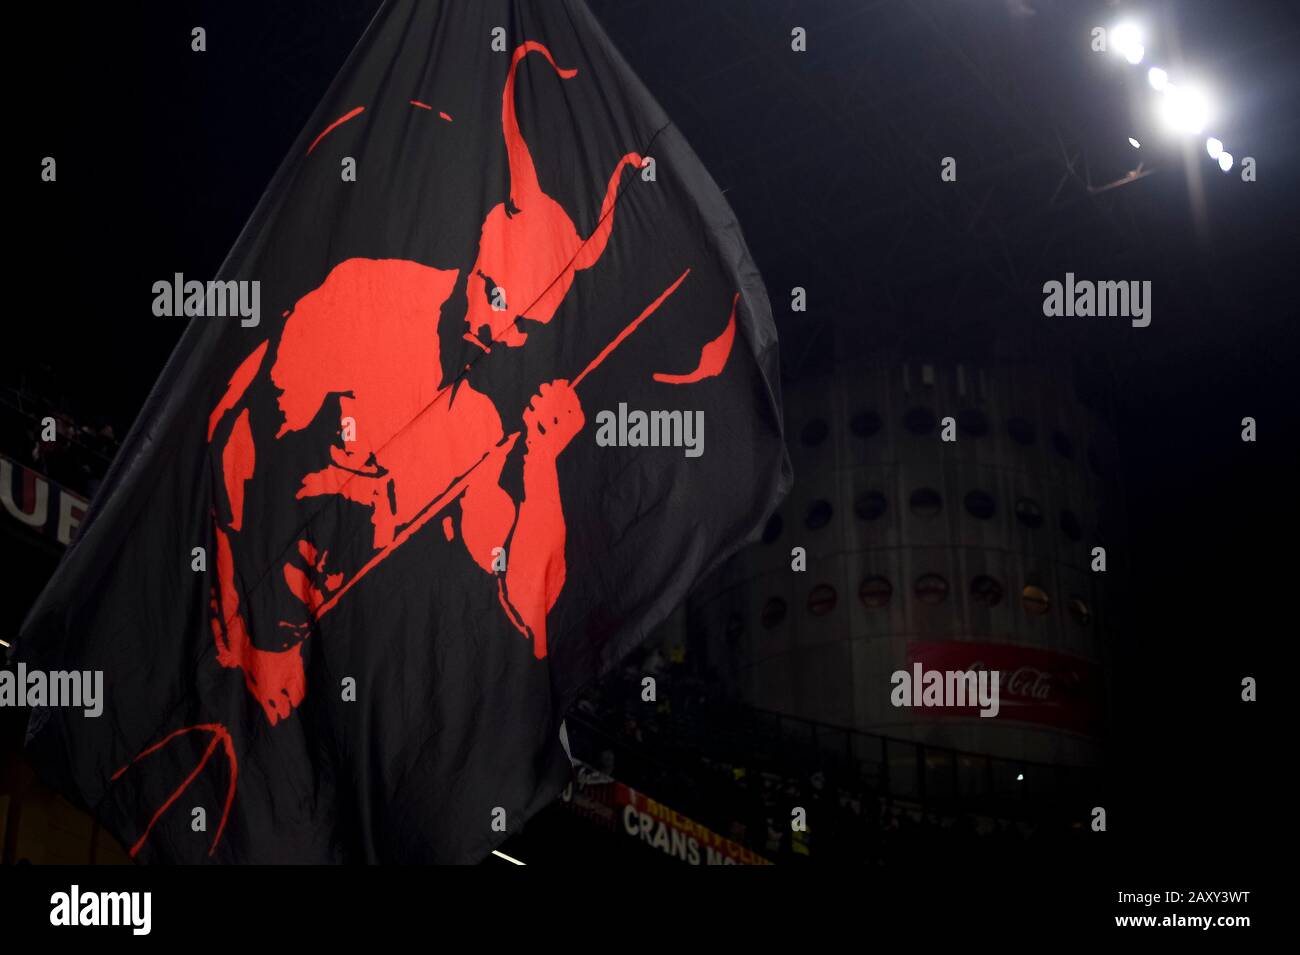 Milan, Italy - 13 February, 2020: A fan of AC Milan waves a flag with a  devil on it prior to the Coppa Italia semi final football match between AC  Milan and